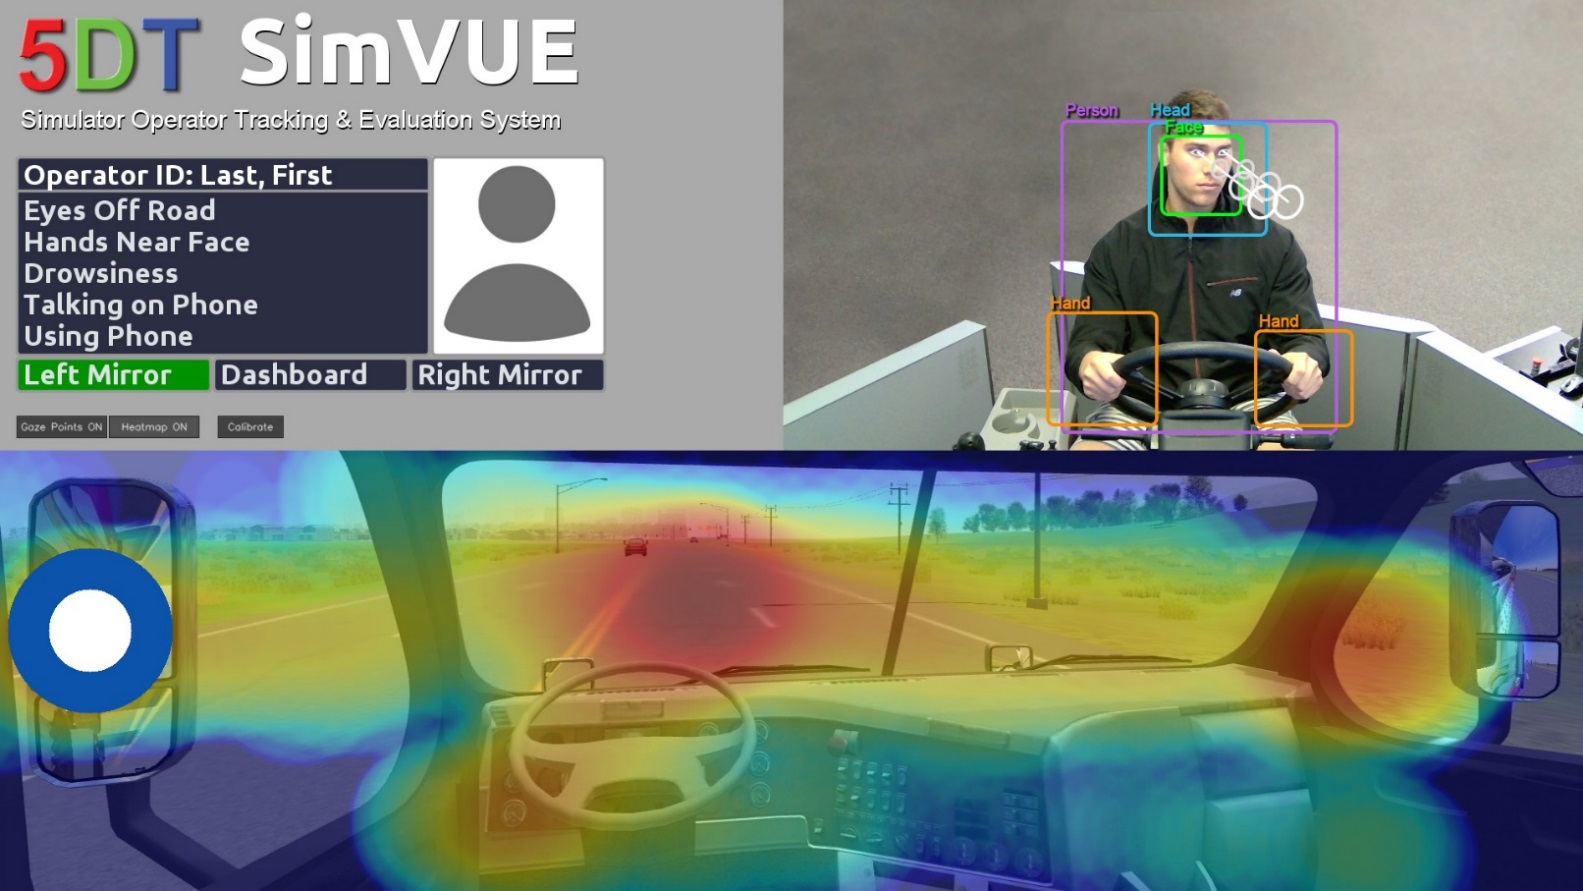 SimVUE™ with heatmap functionality turned on. The heatmap shows the dwell time of the simulator occupant’s gaze point. The simulator occupant is checking his left mirror. Both the operator’s hands are on the steering wheel.